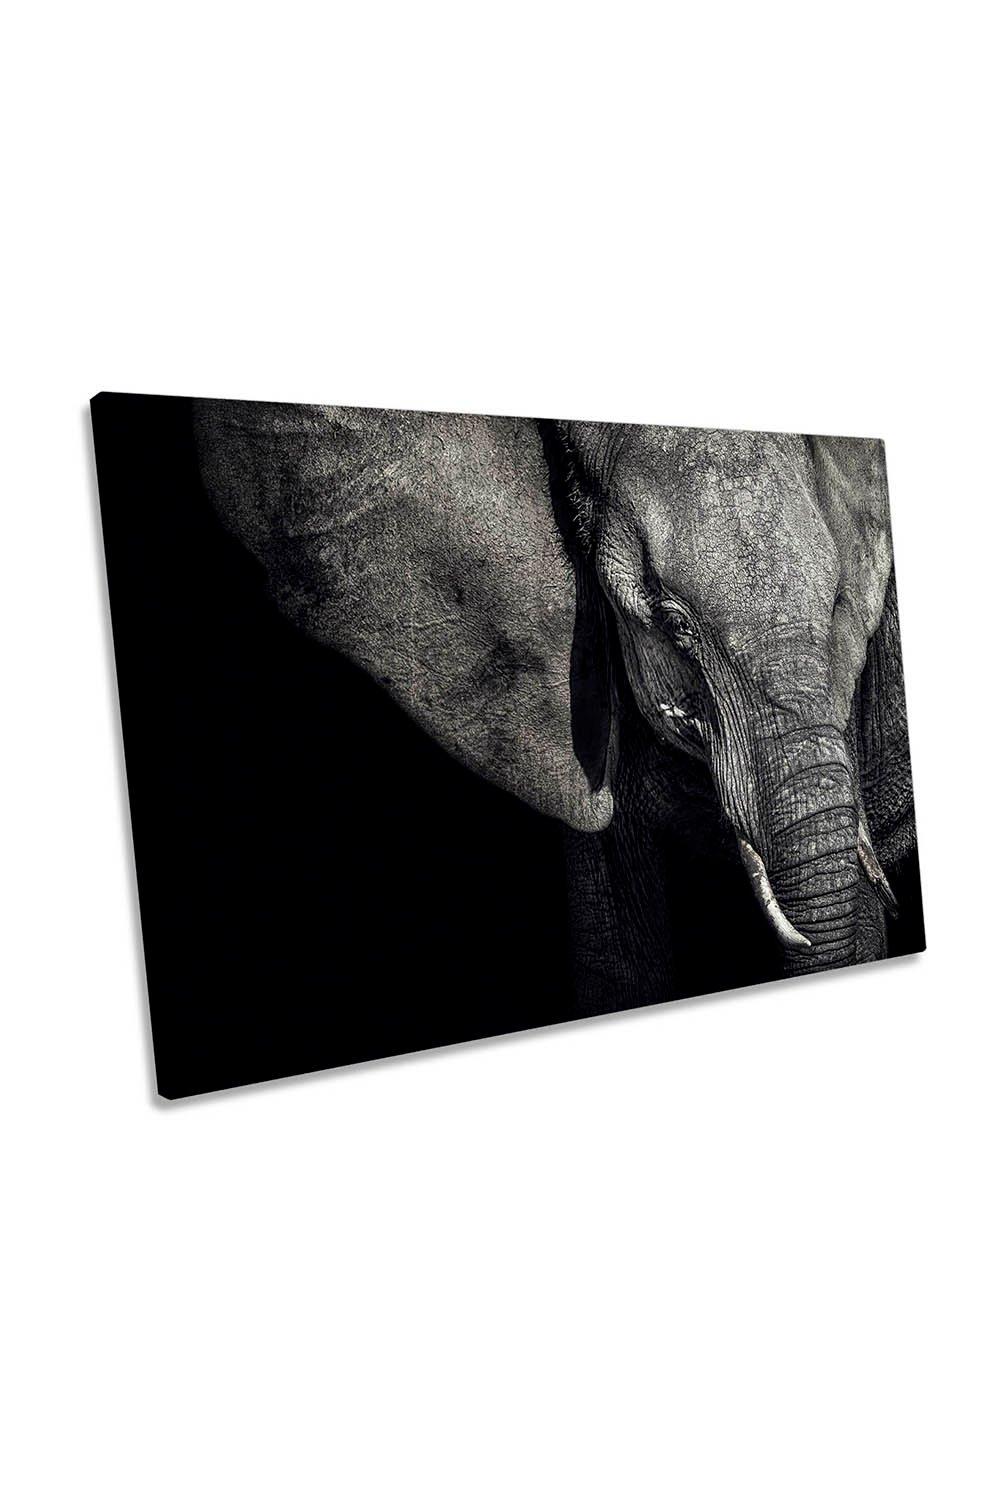 The Matriarch Elephant Canvas Wall Art Picture Print